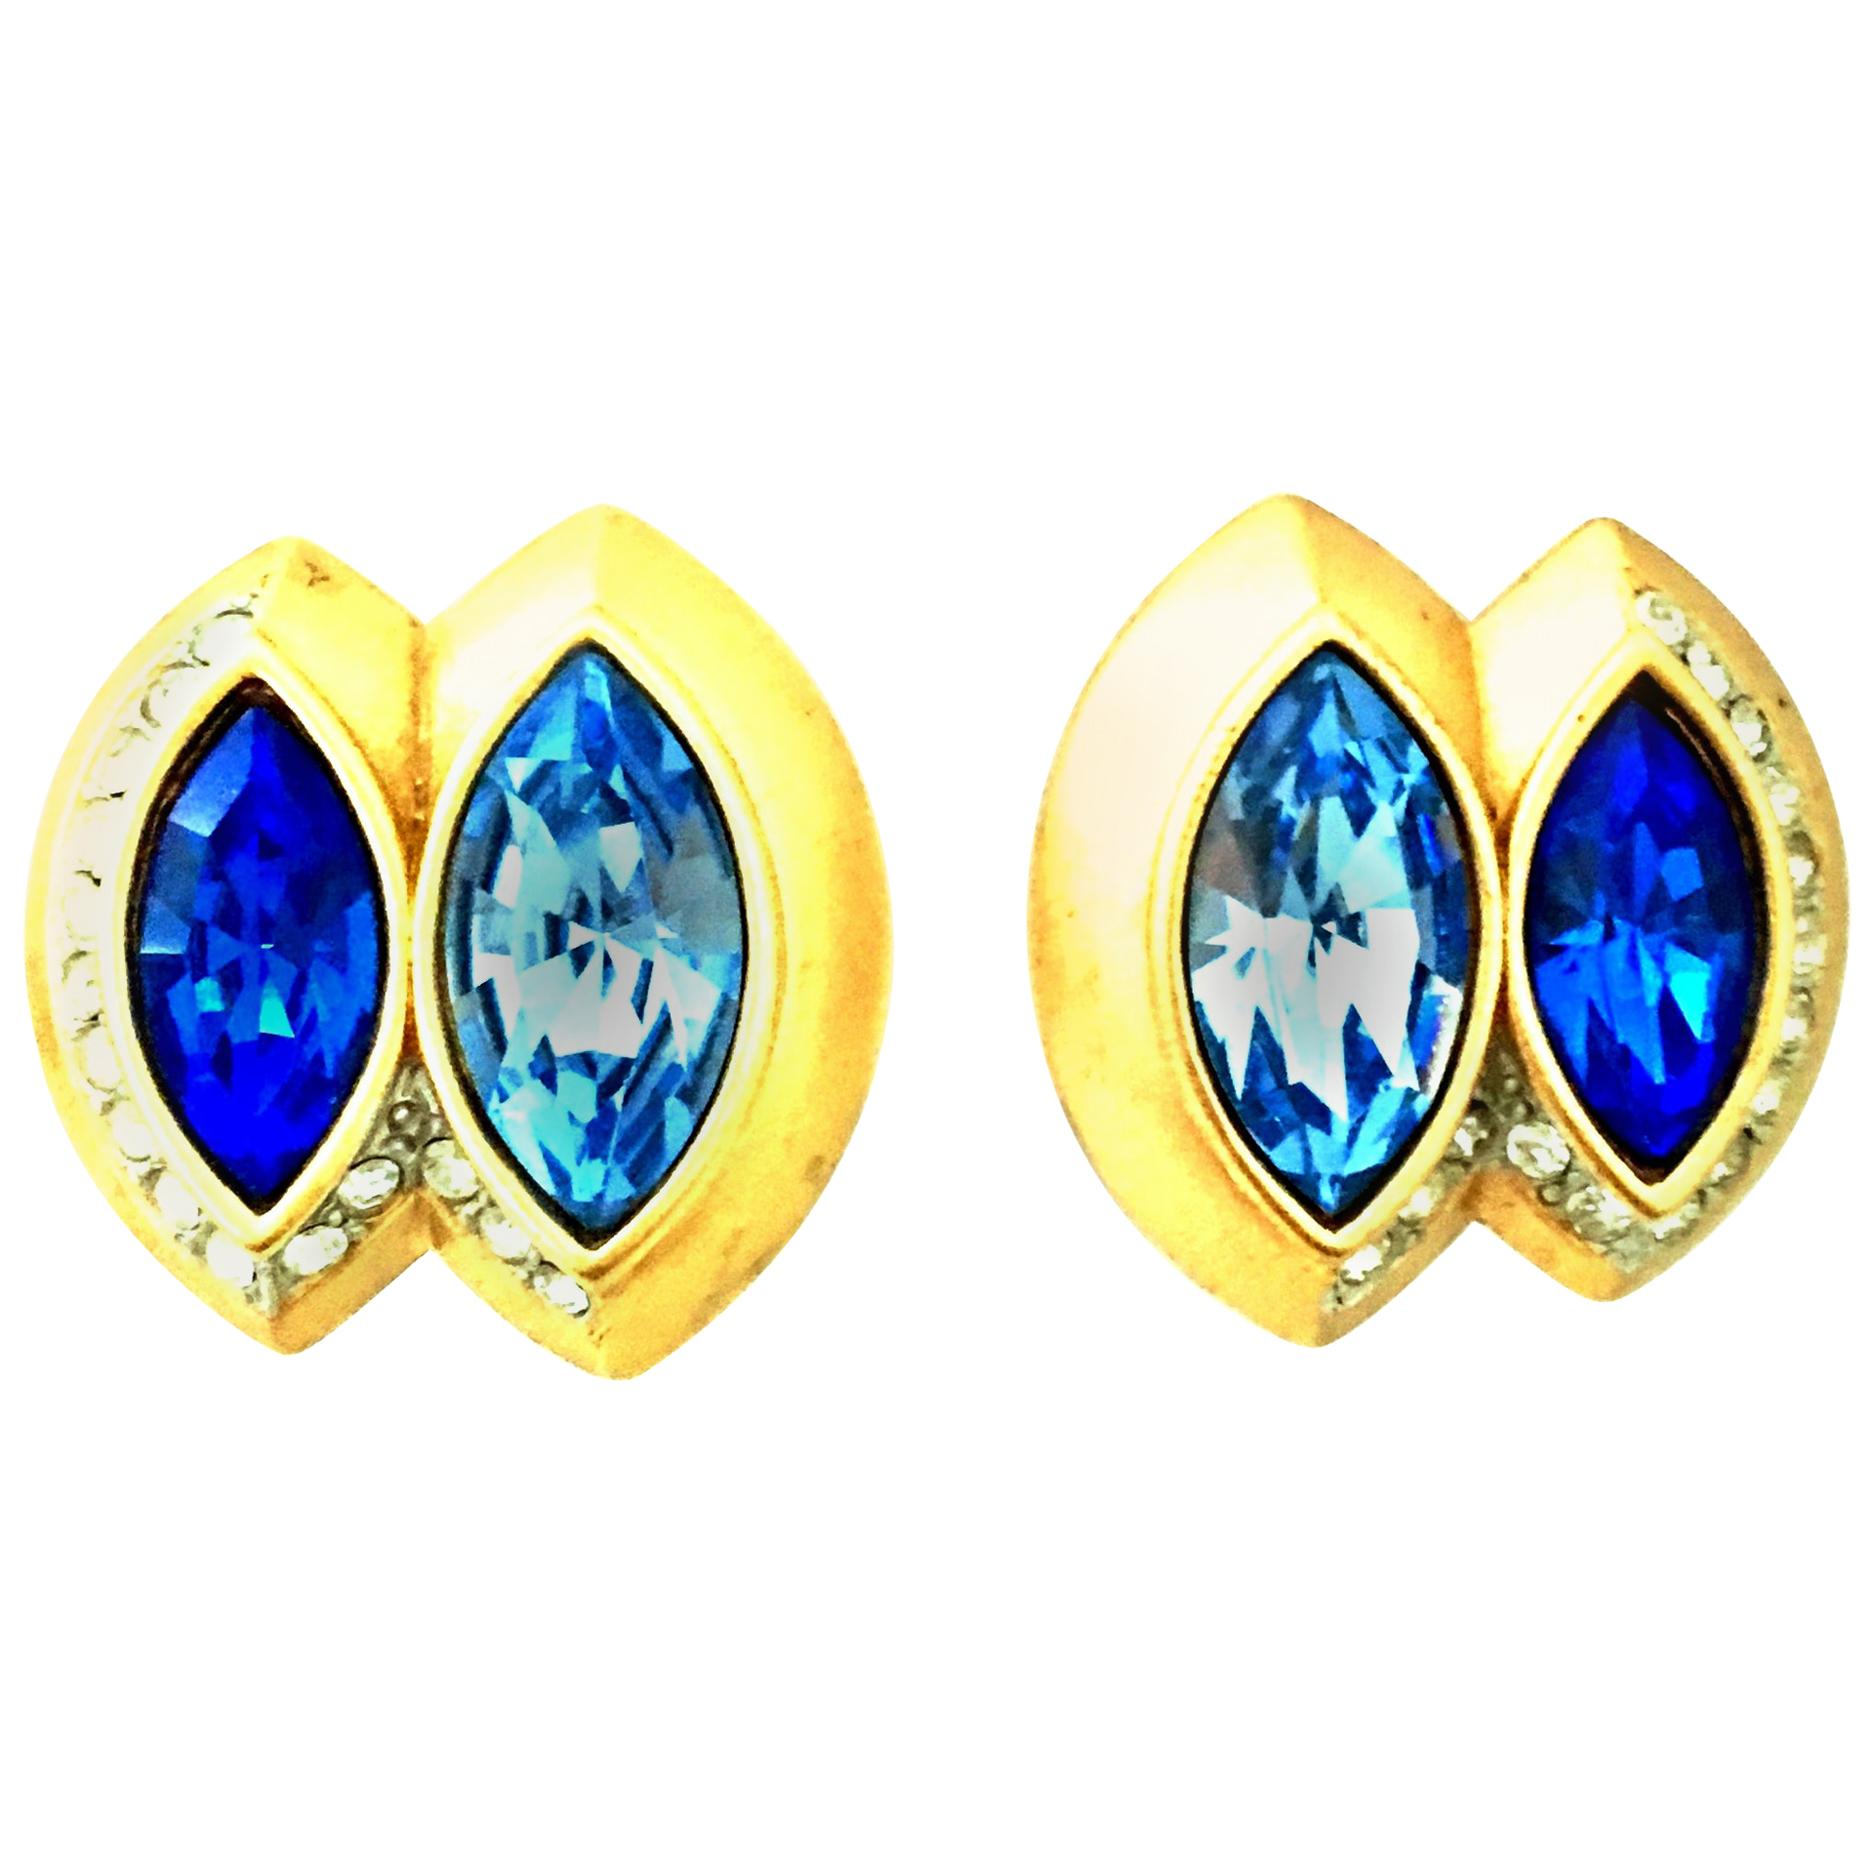 20th Century Pair Of Gold & Sapphire Blue Swarovski Crystal Earrings By, Monet